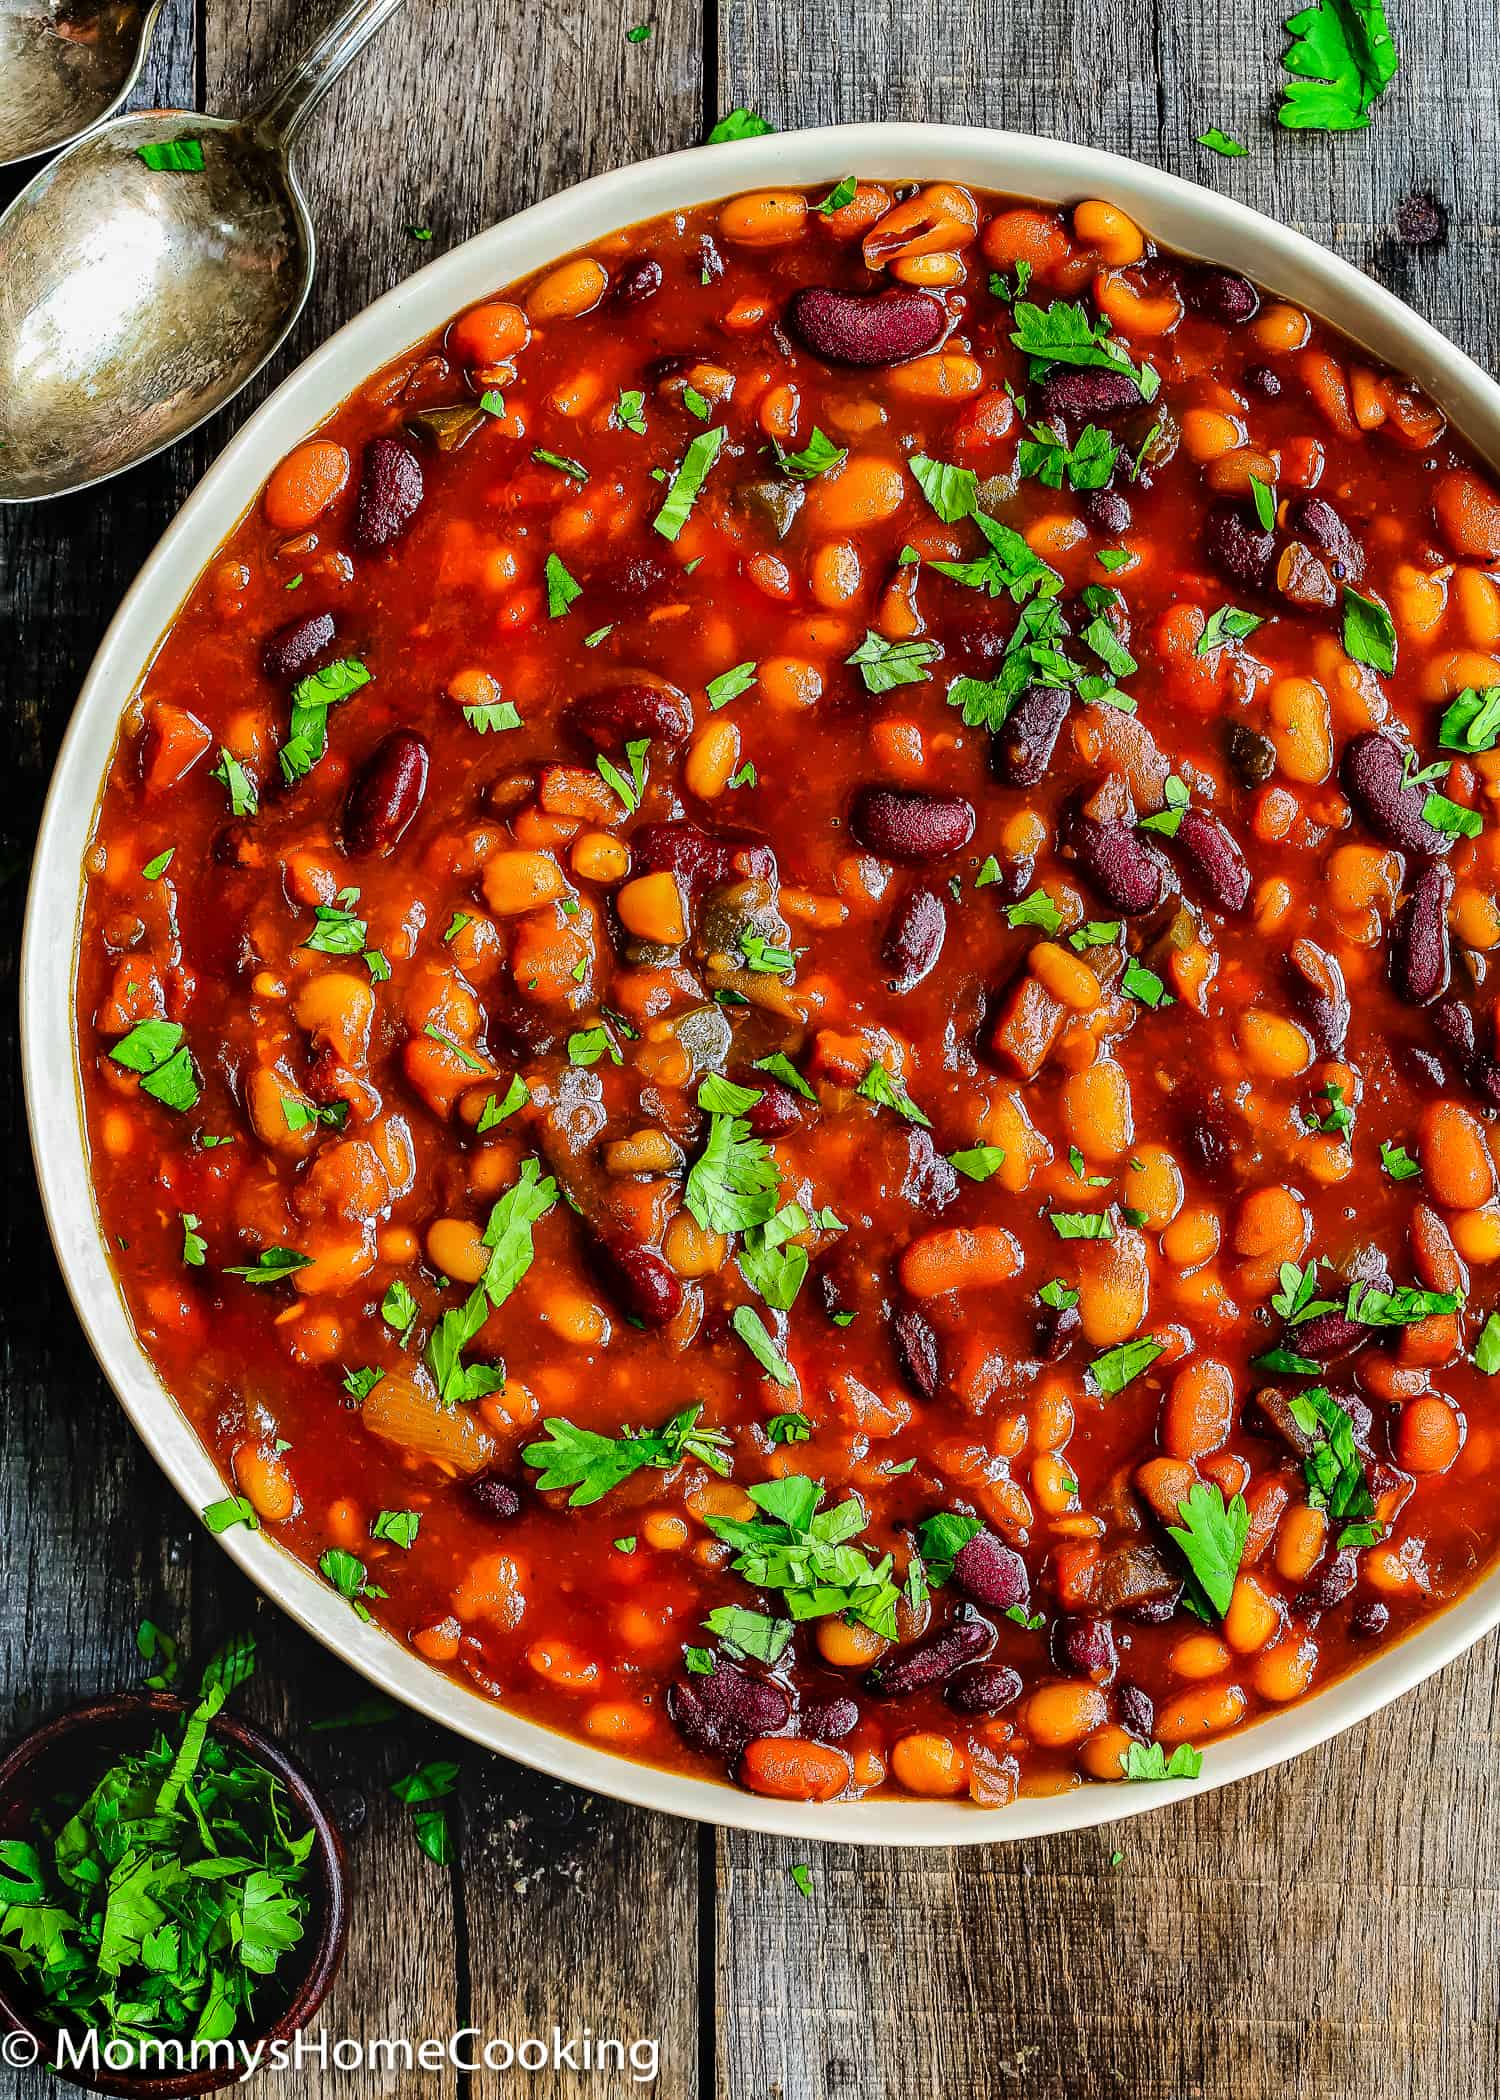 Homemade baked beans in a serving bowl garnished with chopped cilantro.